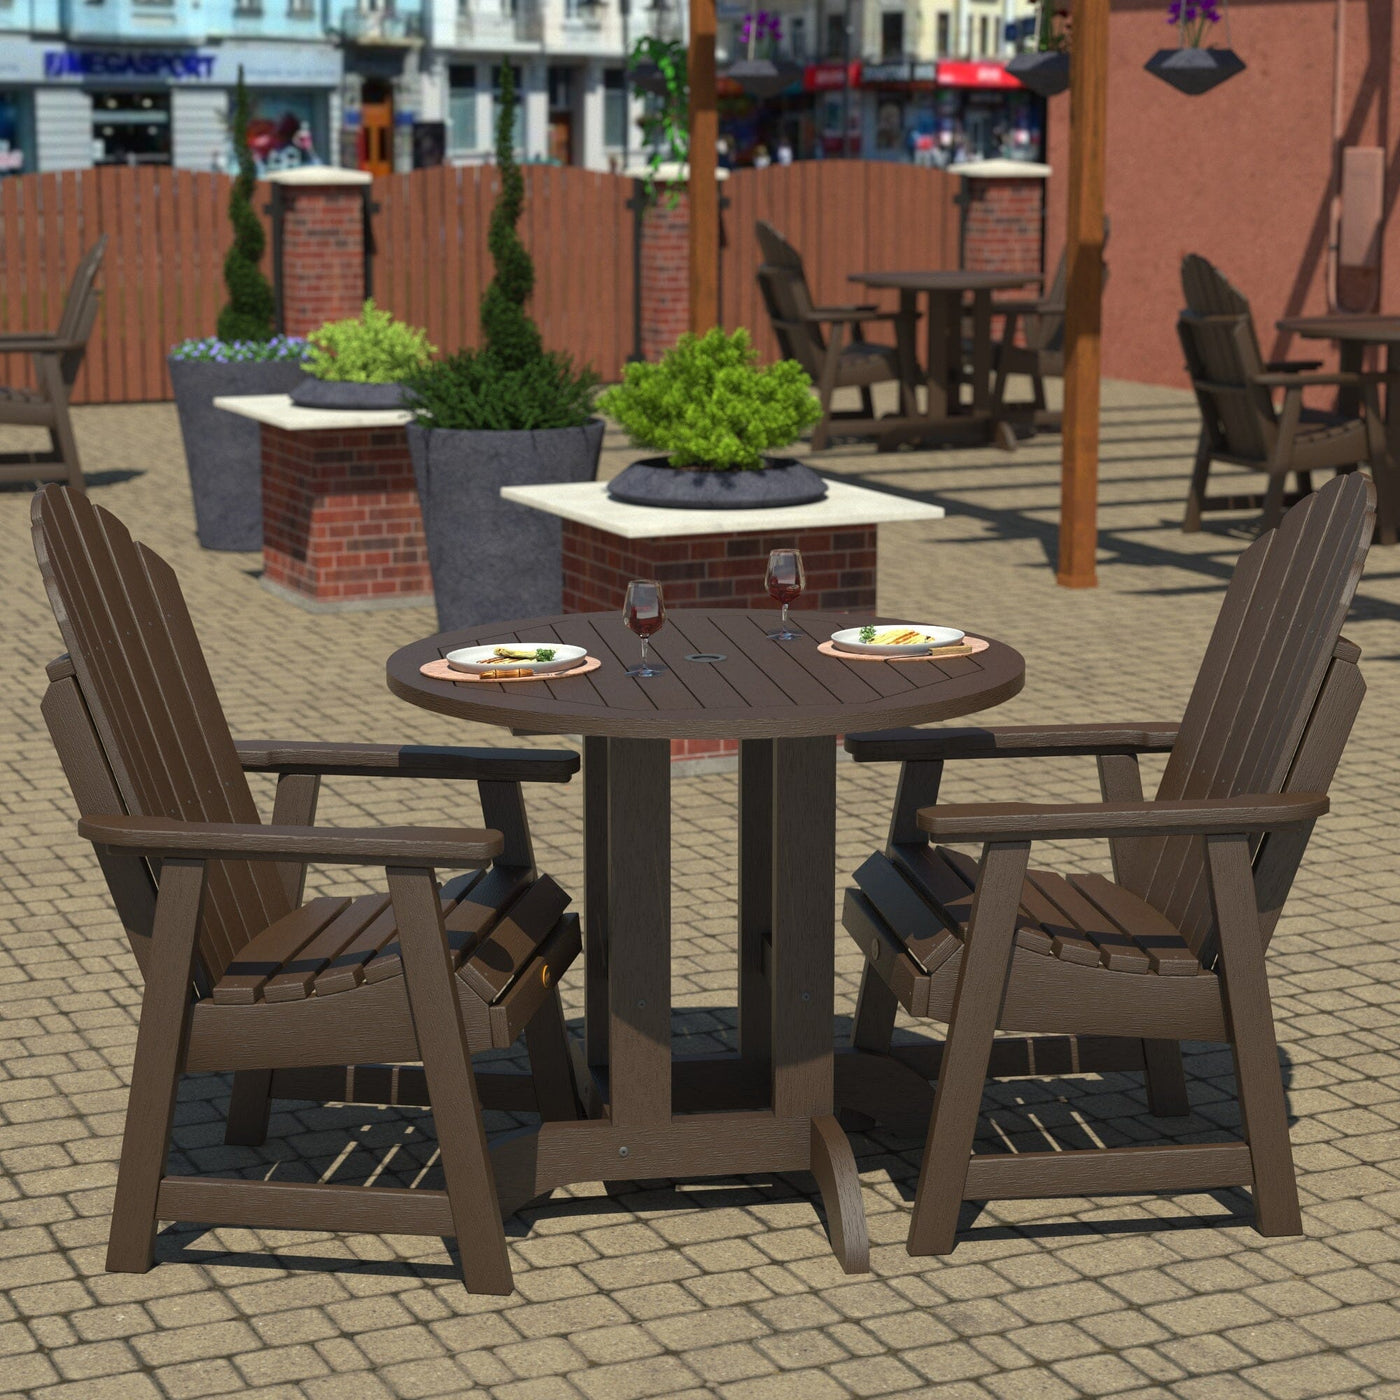 Commercial Grade 3 Pc Muskoka Adirondack Bistro Dining Set with 36” Table Kitted Sets Sequoia Professional 